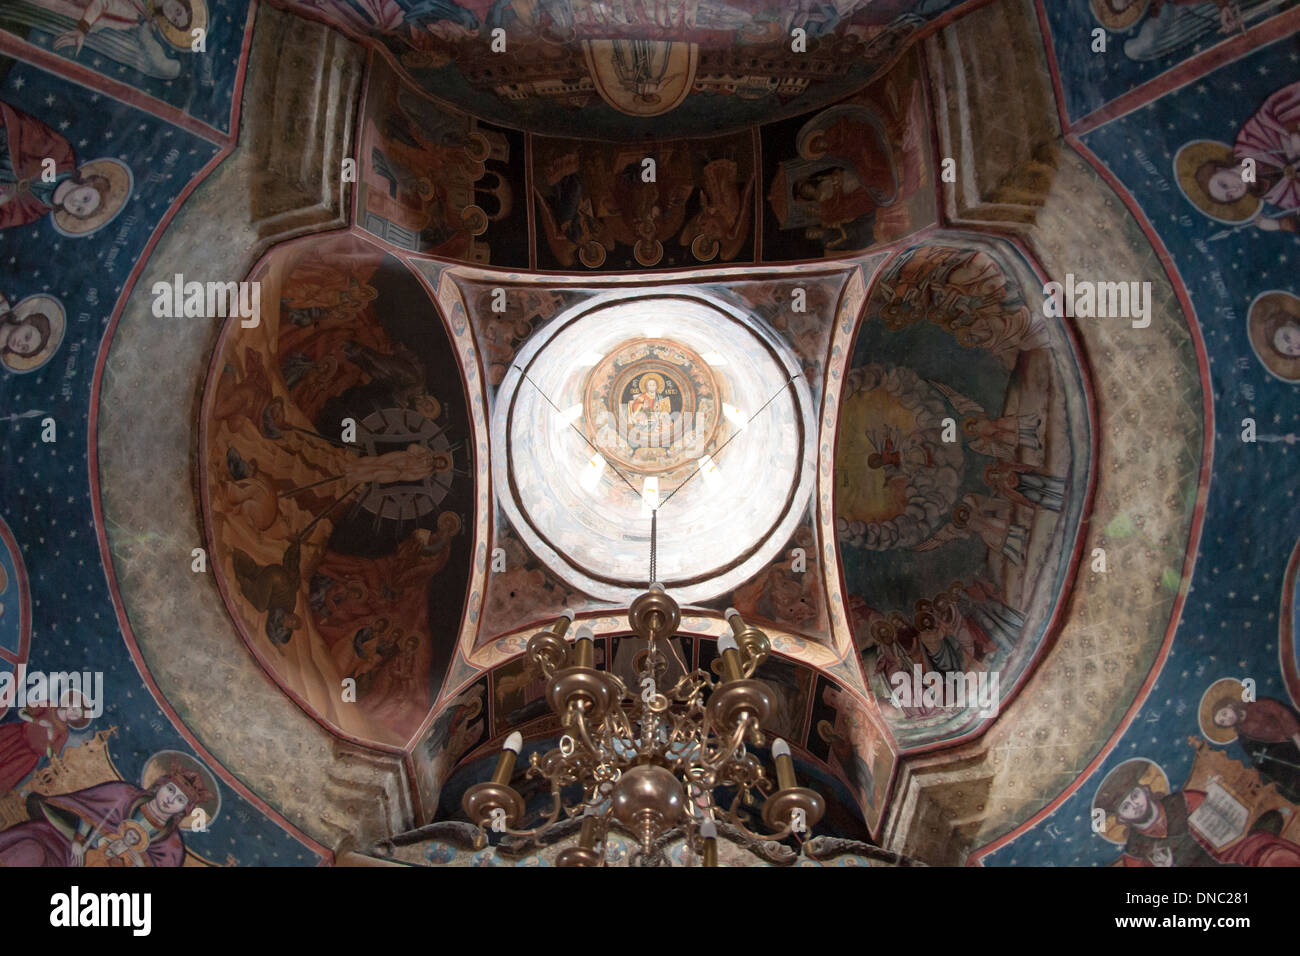 Interior view of the ceiling and cupola of the Old Church (Biserica Veche) at the Sinaia Monastery in Prahova county, Romania. Stock Photo